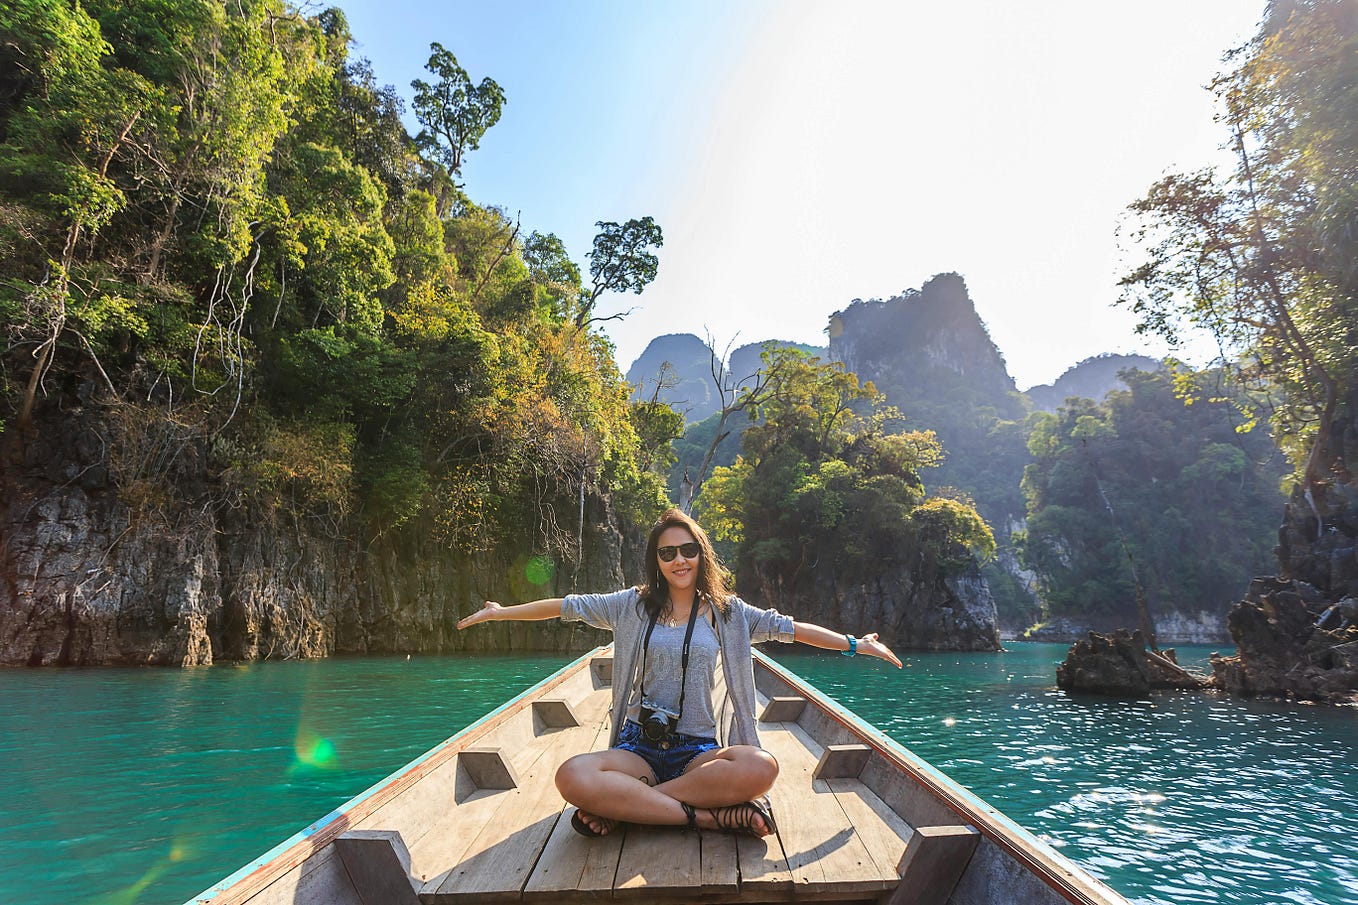 Woman sitting on a wooden walkway across a beautiful clear blue lake, surrounded by trees and rocky hillsides